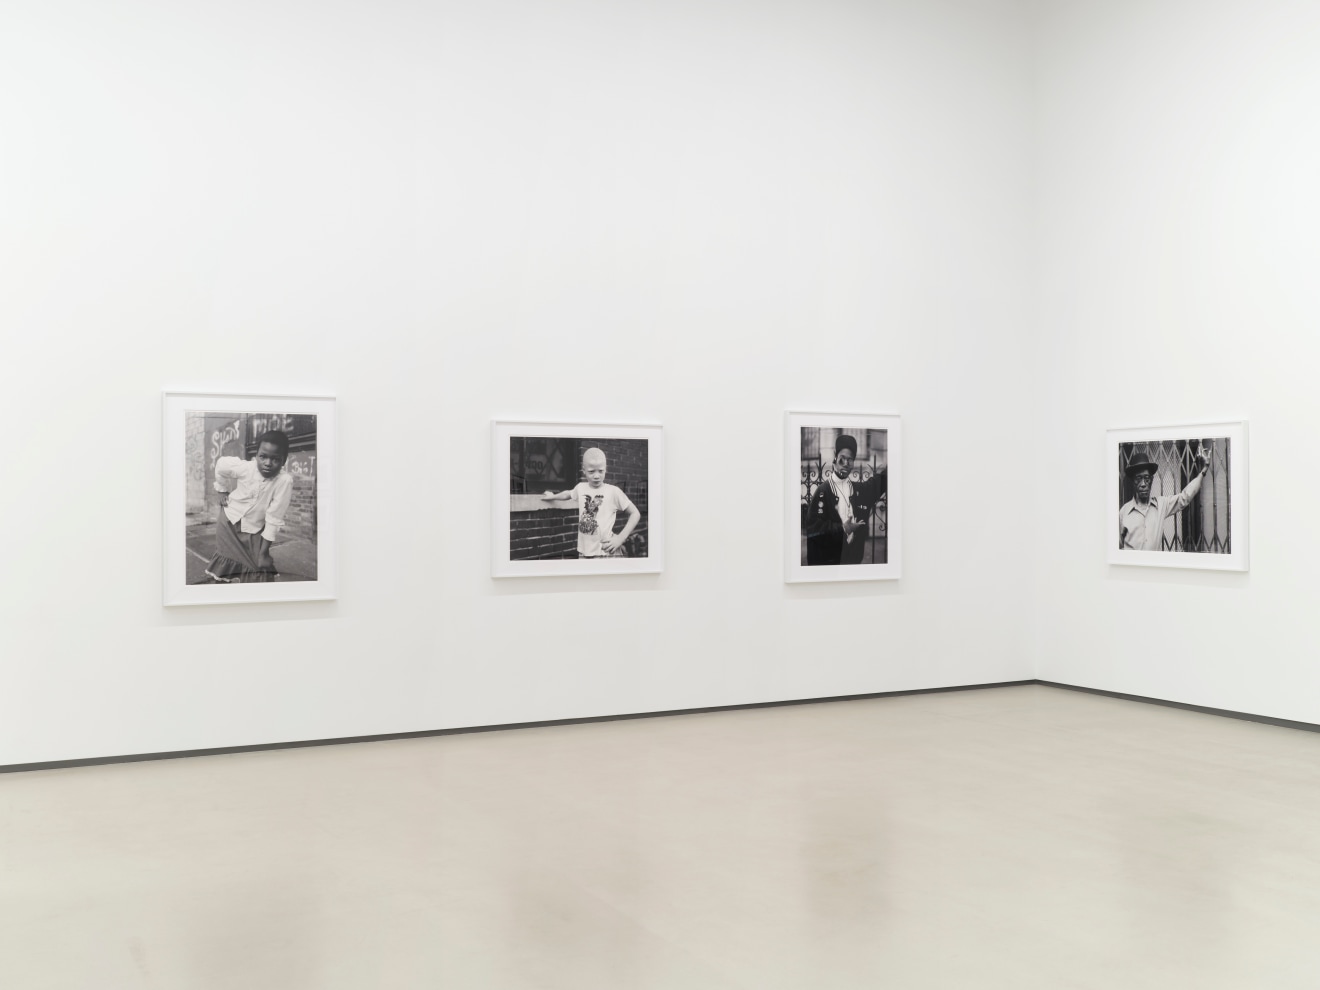 Installation view of&nbsp;Dawoud Bey: Pictures 1976 - 2019&nbsp;at Sean Kelly, Los Angeles, April 29&ndash;June 30, Photography: Brica Wilcox, Courtesy: Sean Kelly